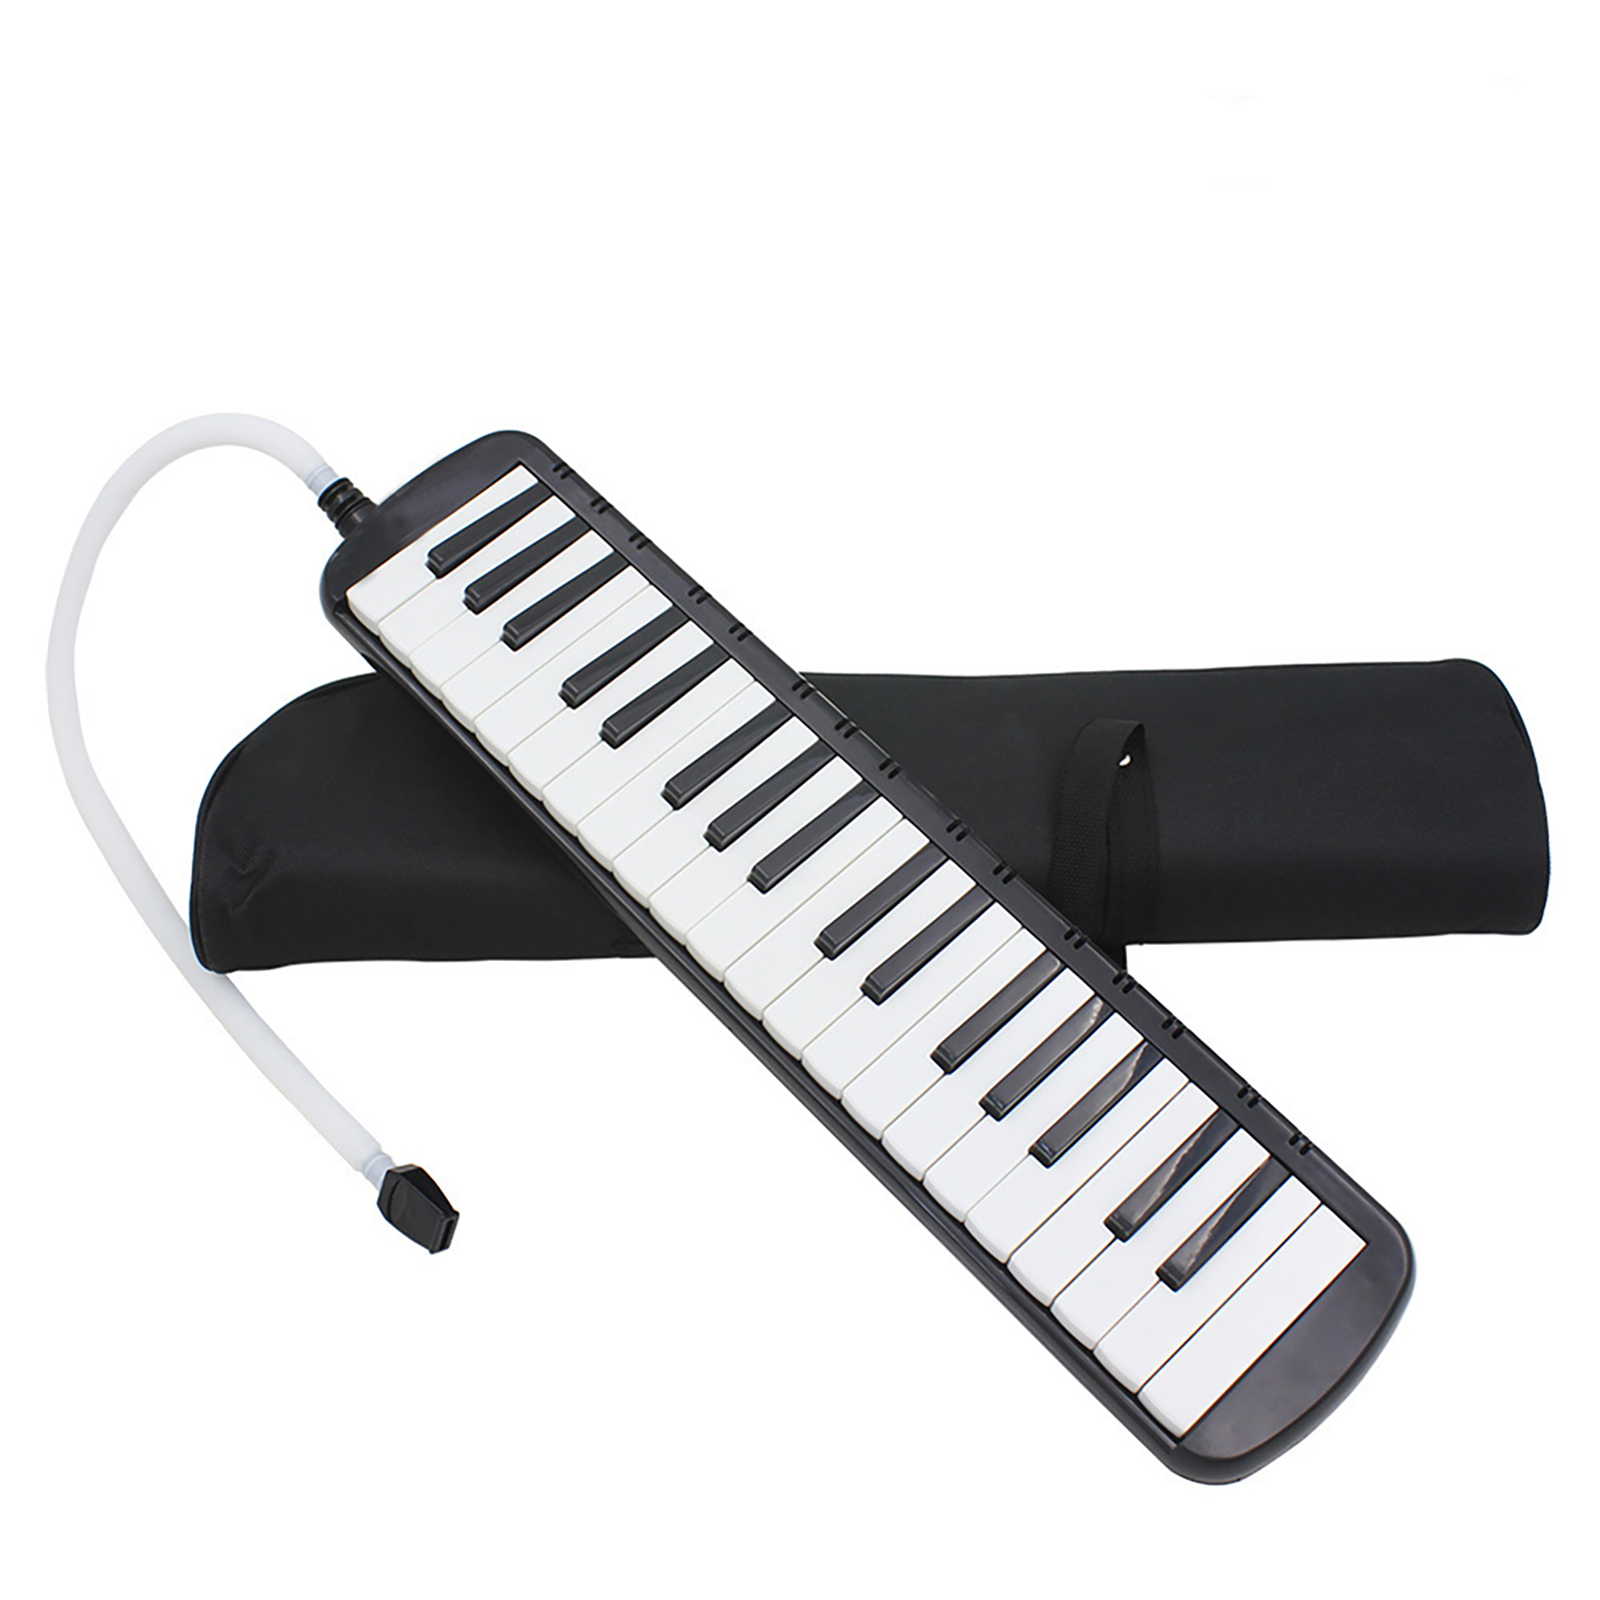 37 Key Melodica For Beginner Piano Style Portable Wind Musical Instrument With Mouthpiece Tube Carrying Bag